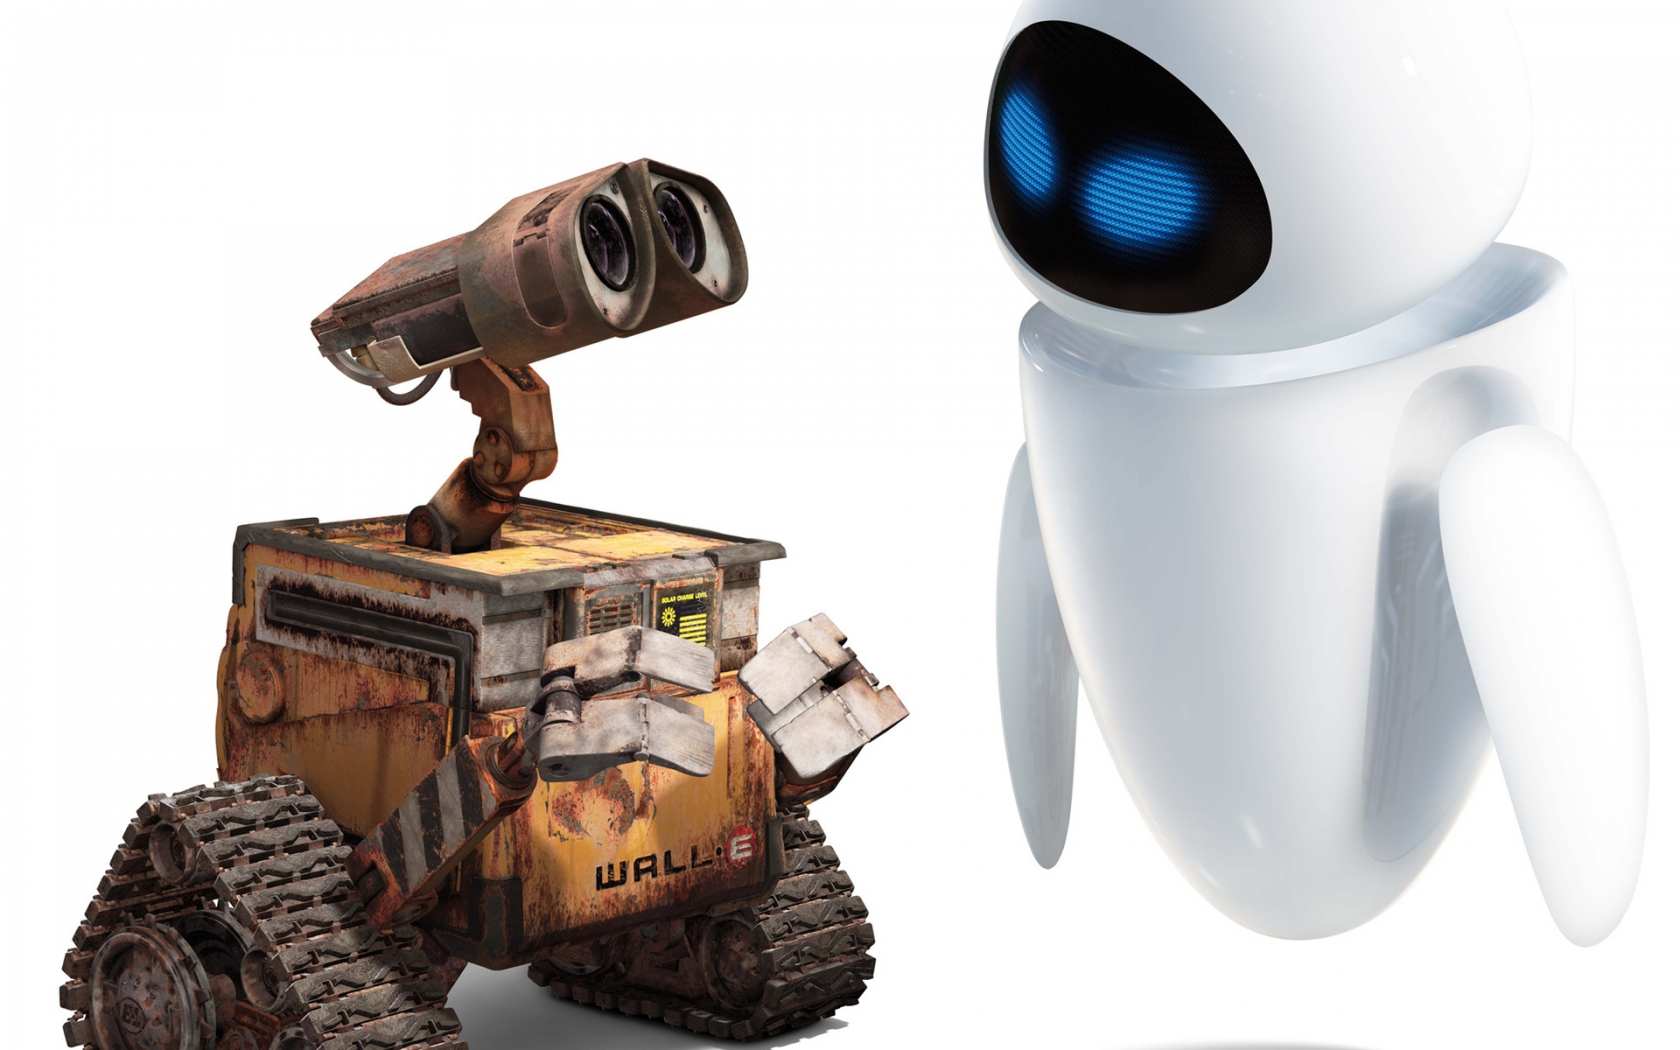 Walle Robots for 1680 x 1050 widescreen resolution